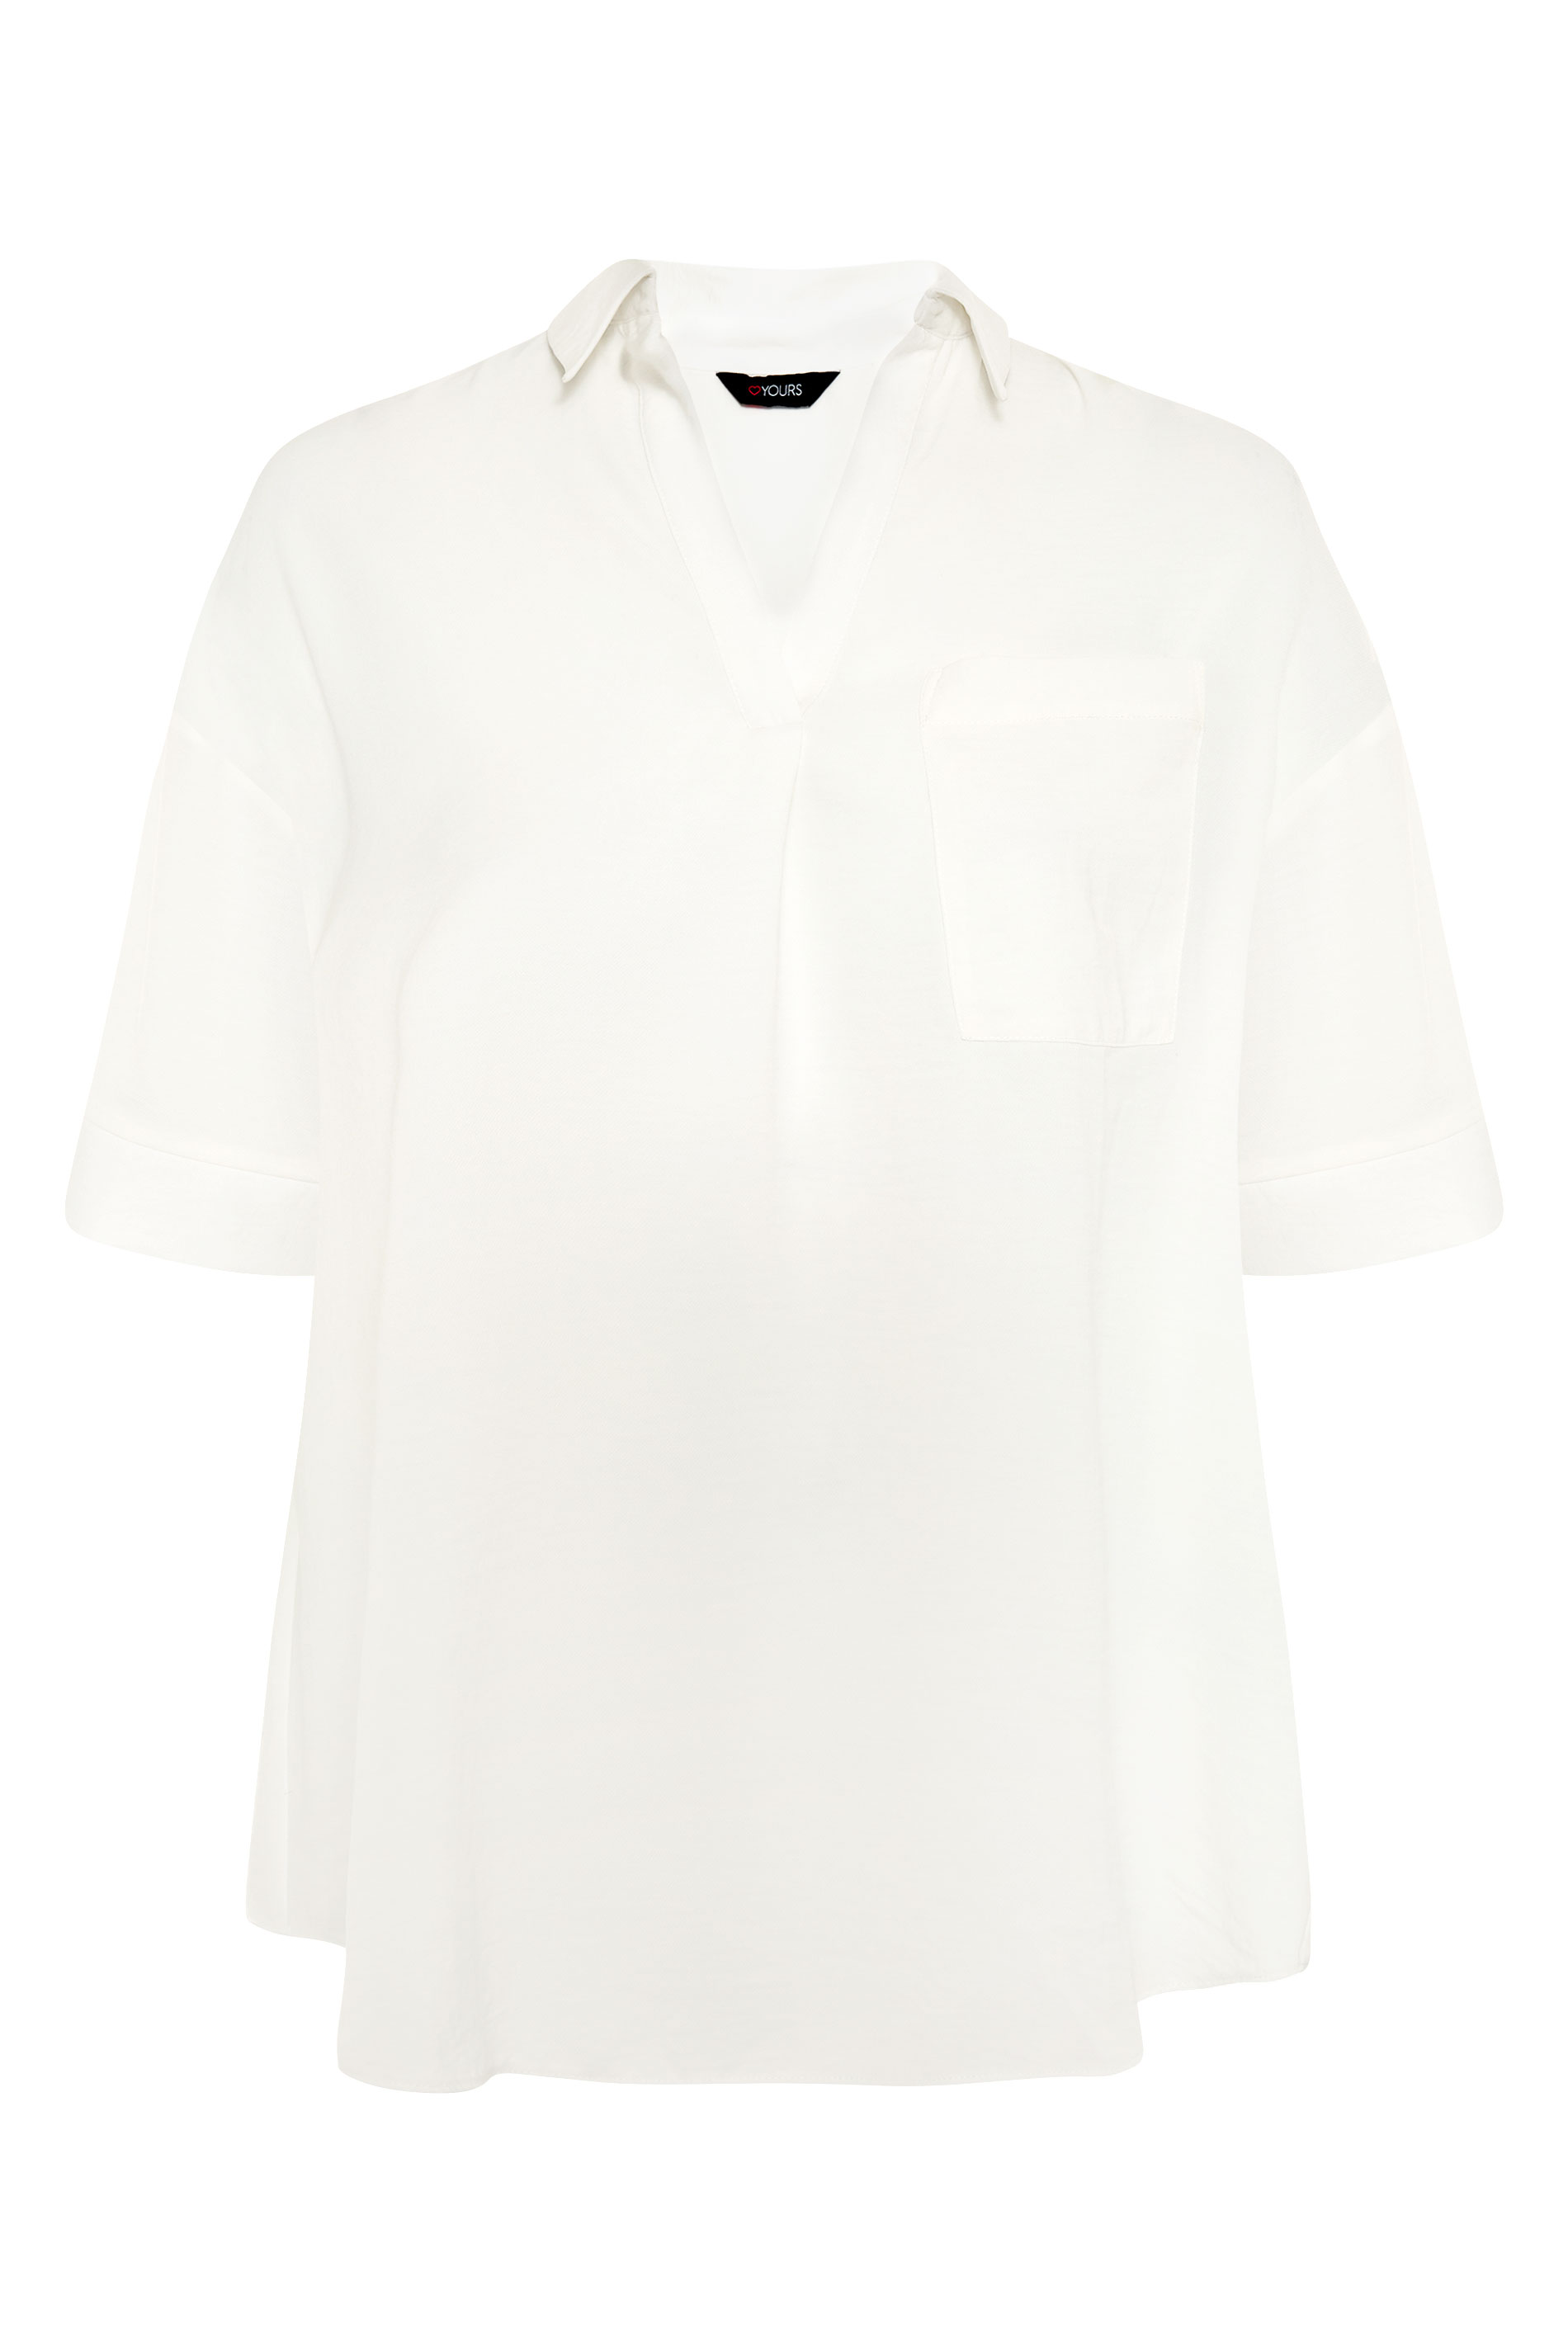 Plus Size THE LIMITED EDIT White Pleated Front Top | Yours Clothing